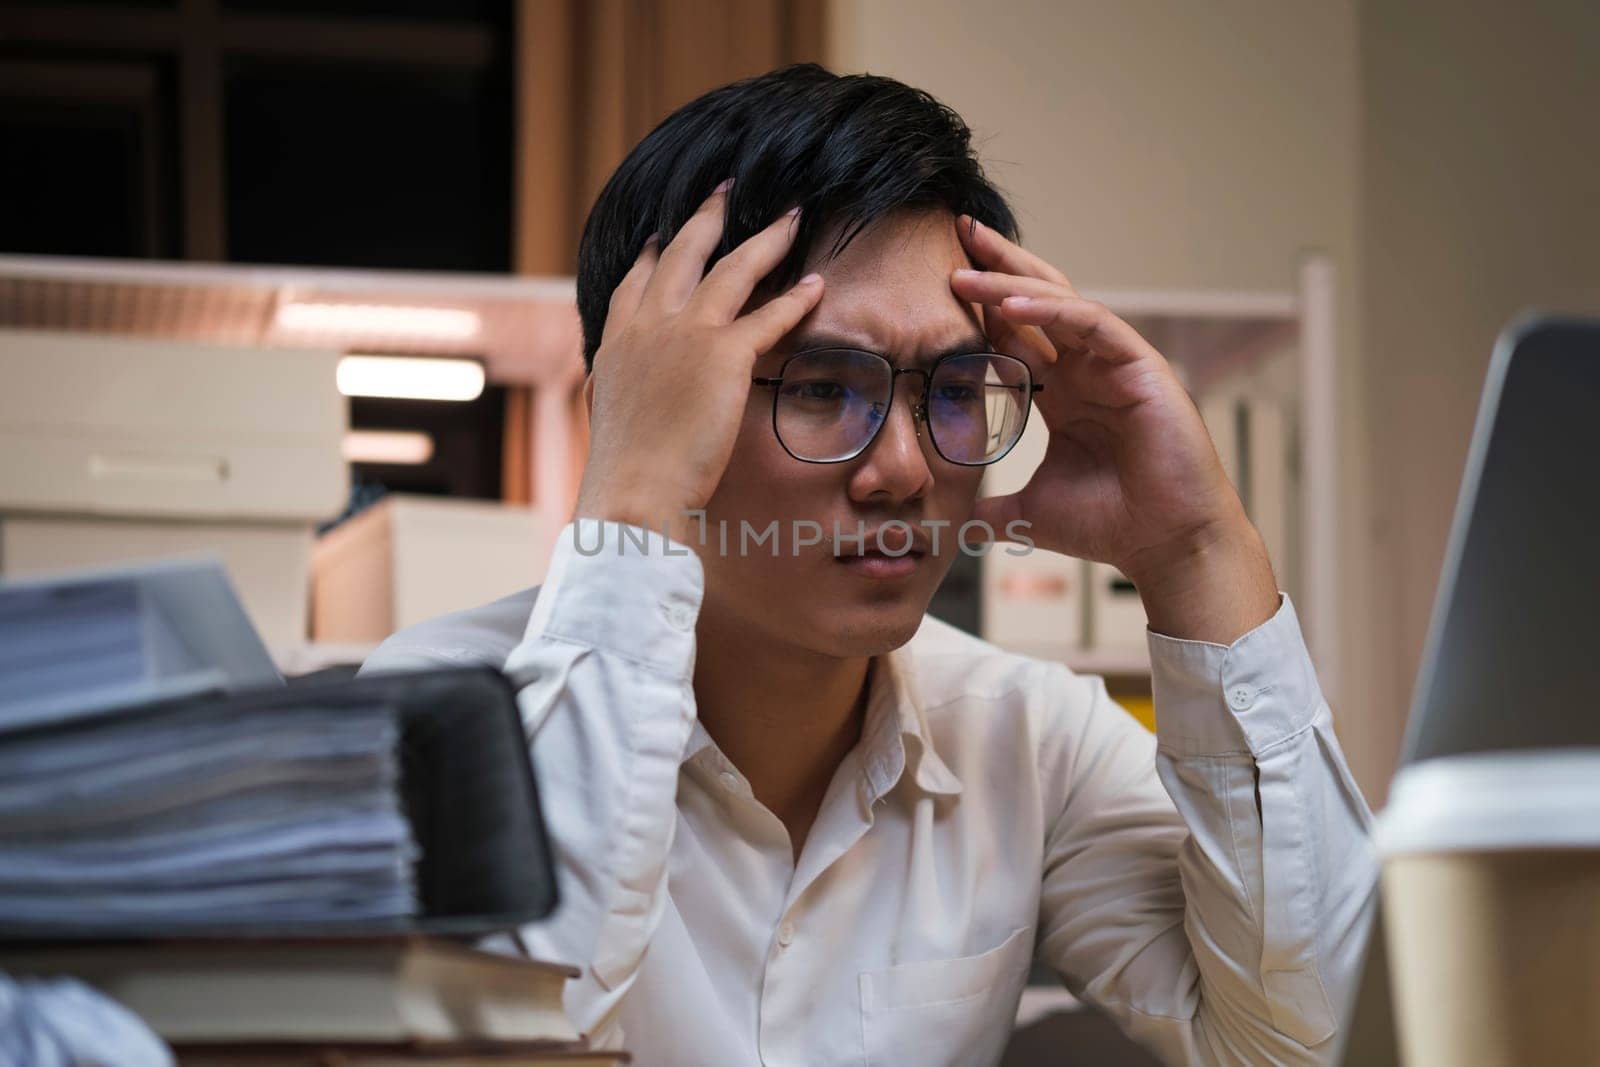 Asian young tired staff businessman using desktop computer having overwork project overnight in office.